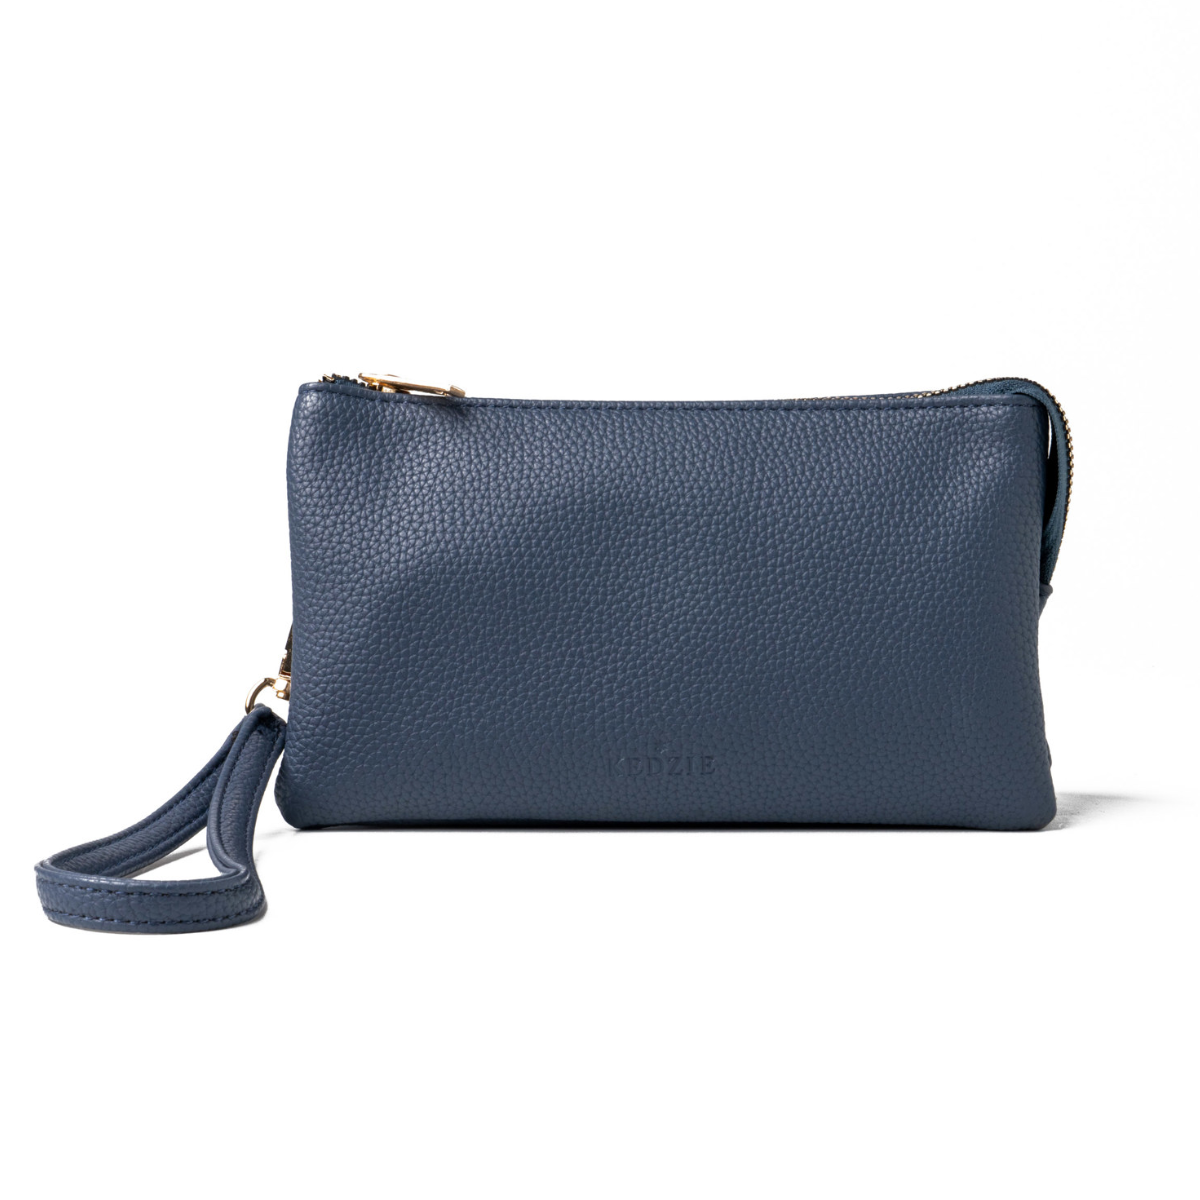 A DM MERCHANDISING INC blue leather Convertible Crossbody Wallet clutch bag with a crossbody strap.